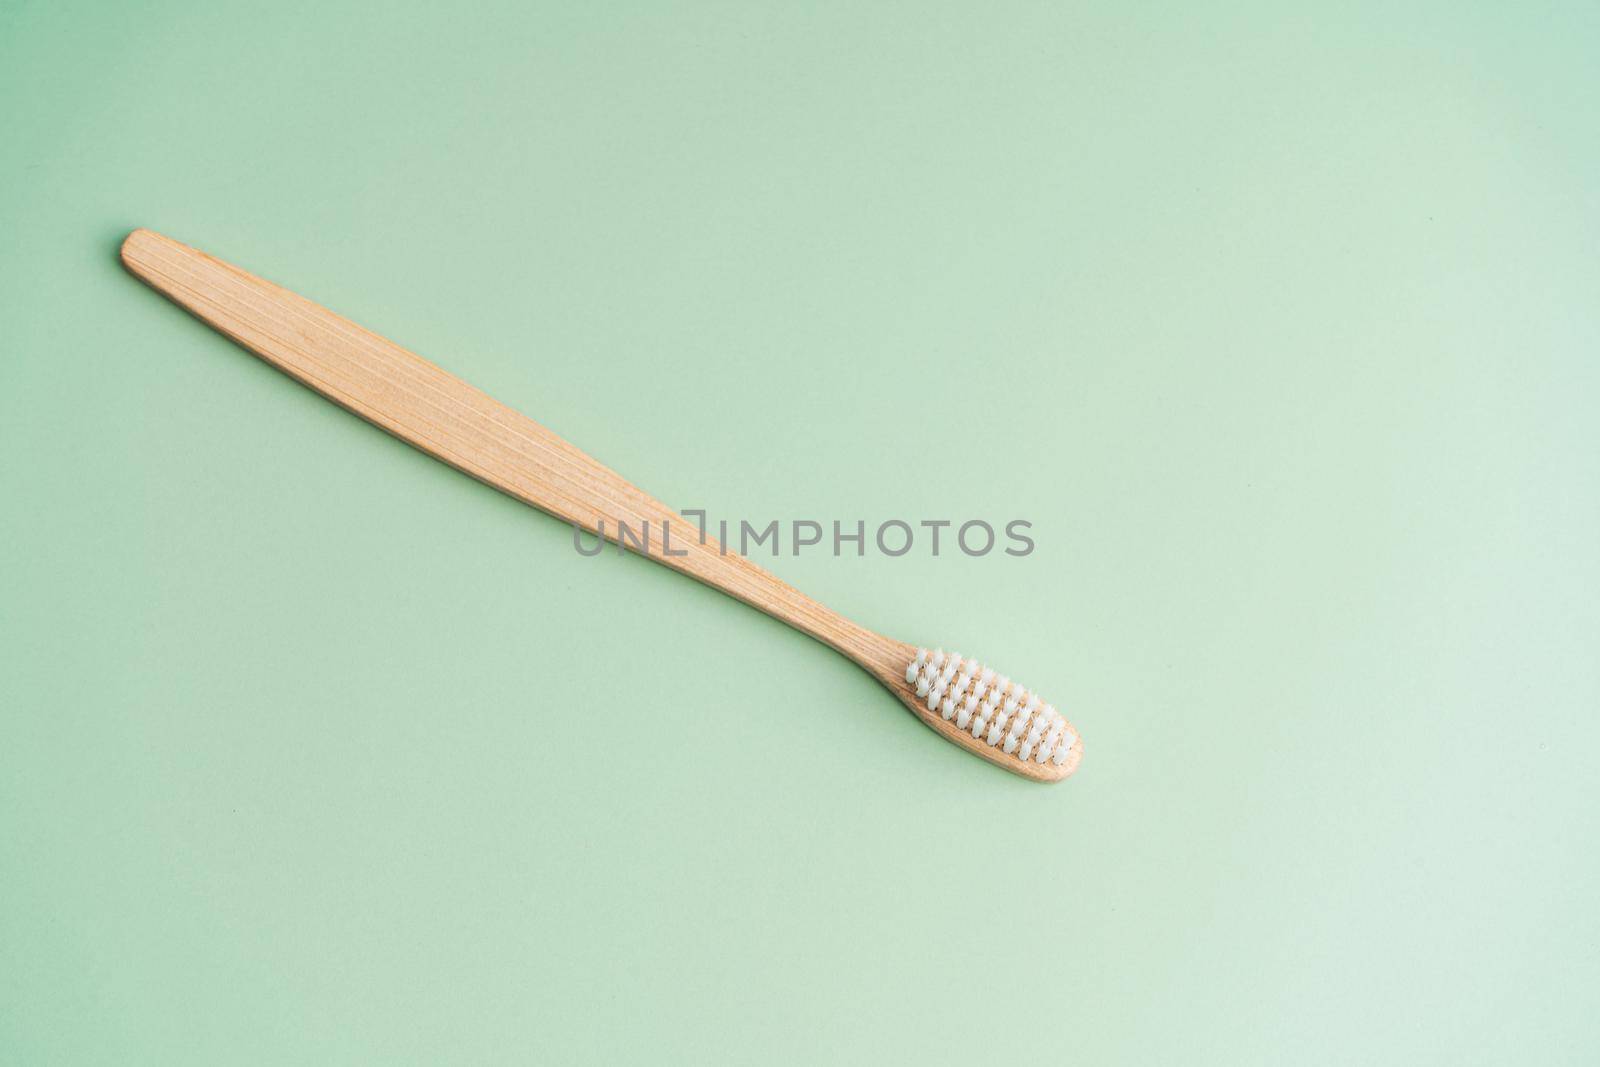 Eco friendly dental health antibacterial bamboo wood toothbrush on green background.